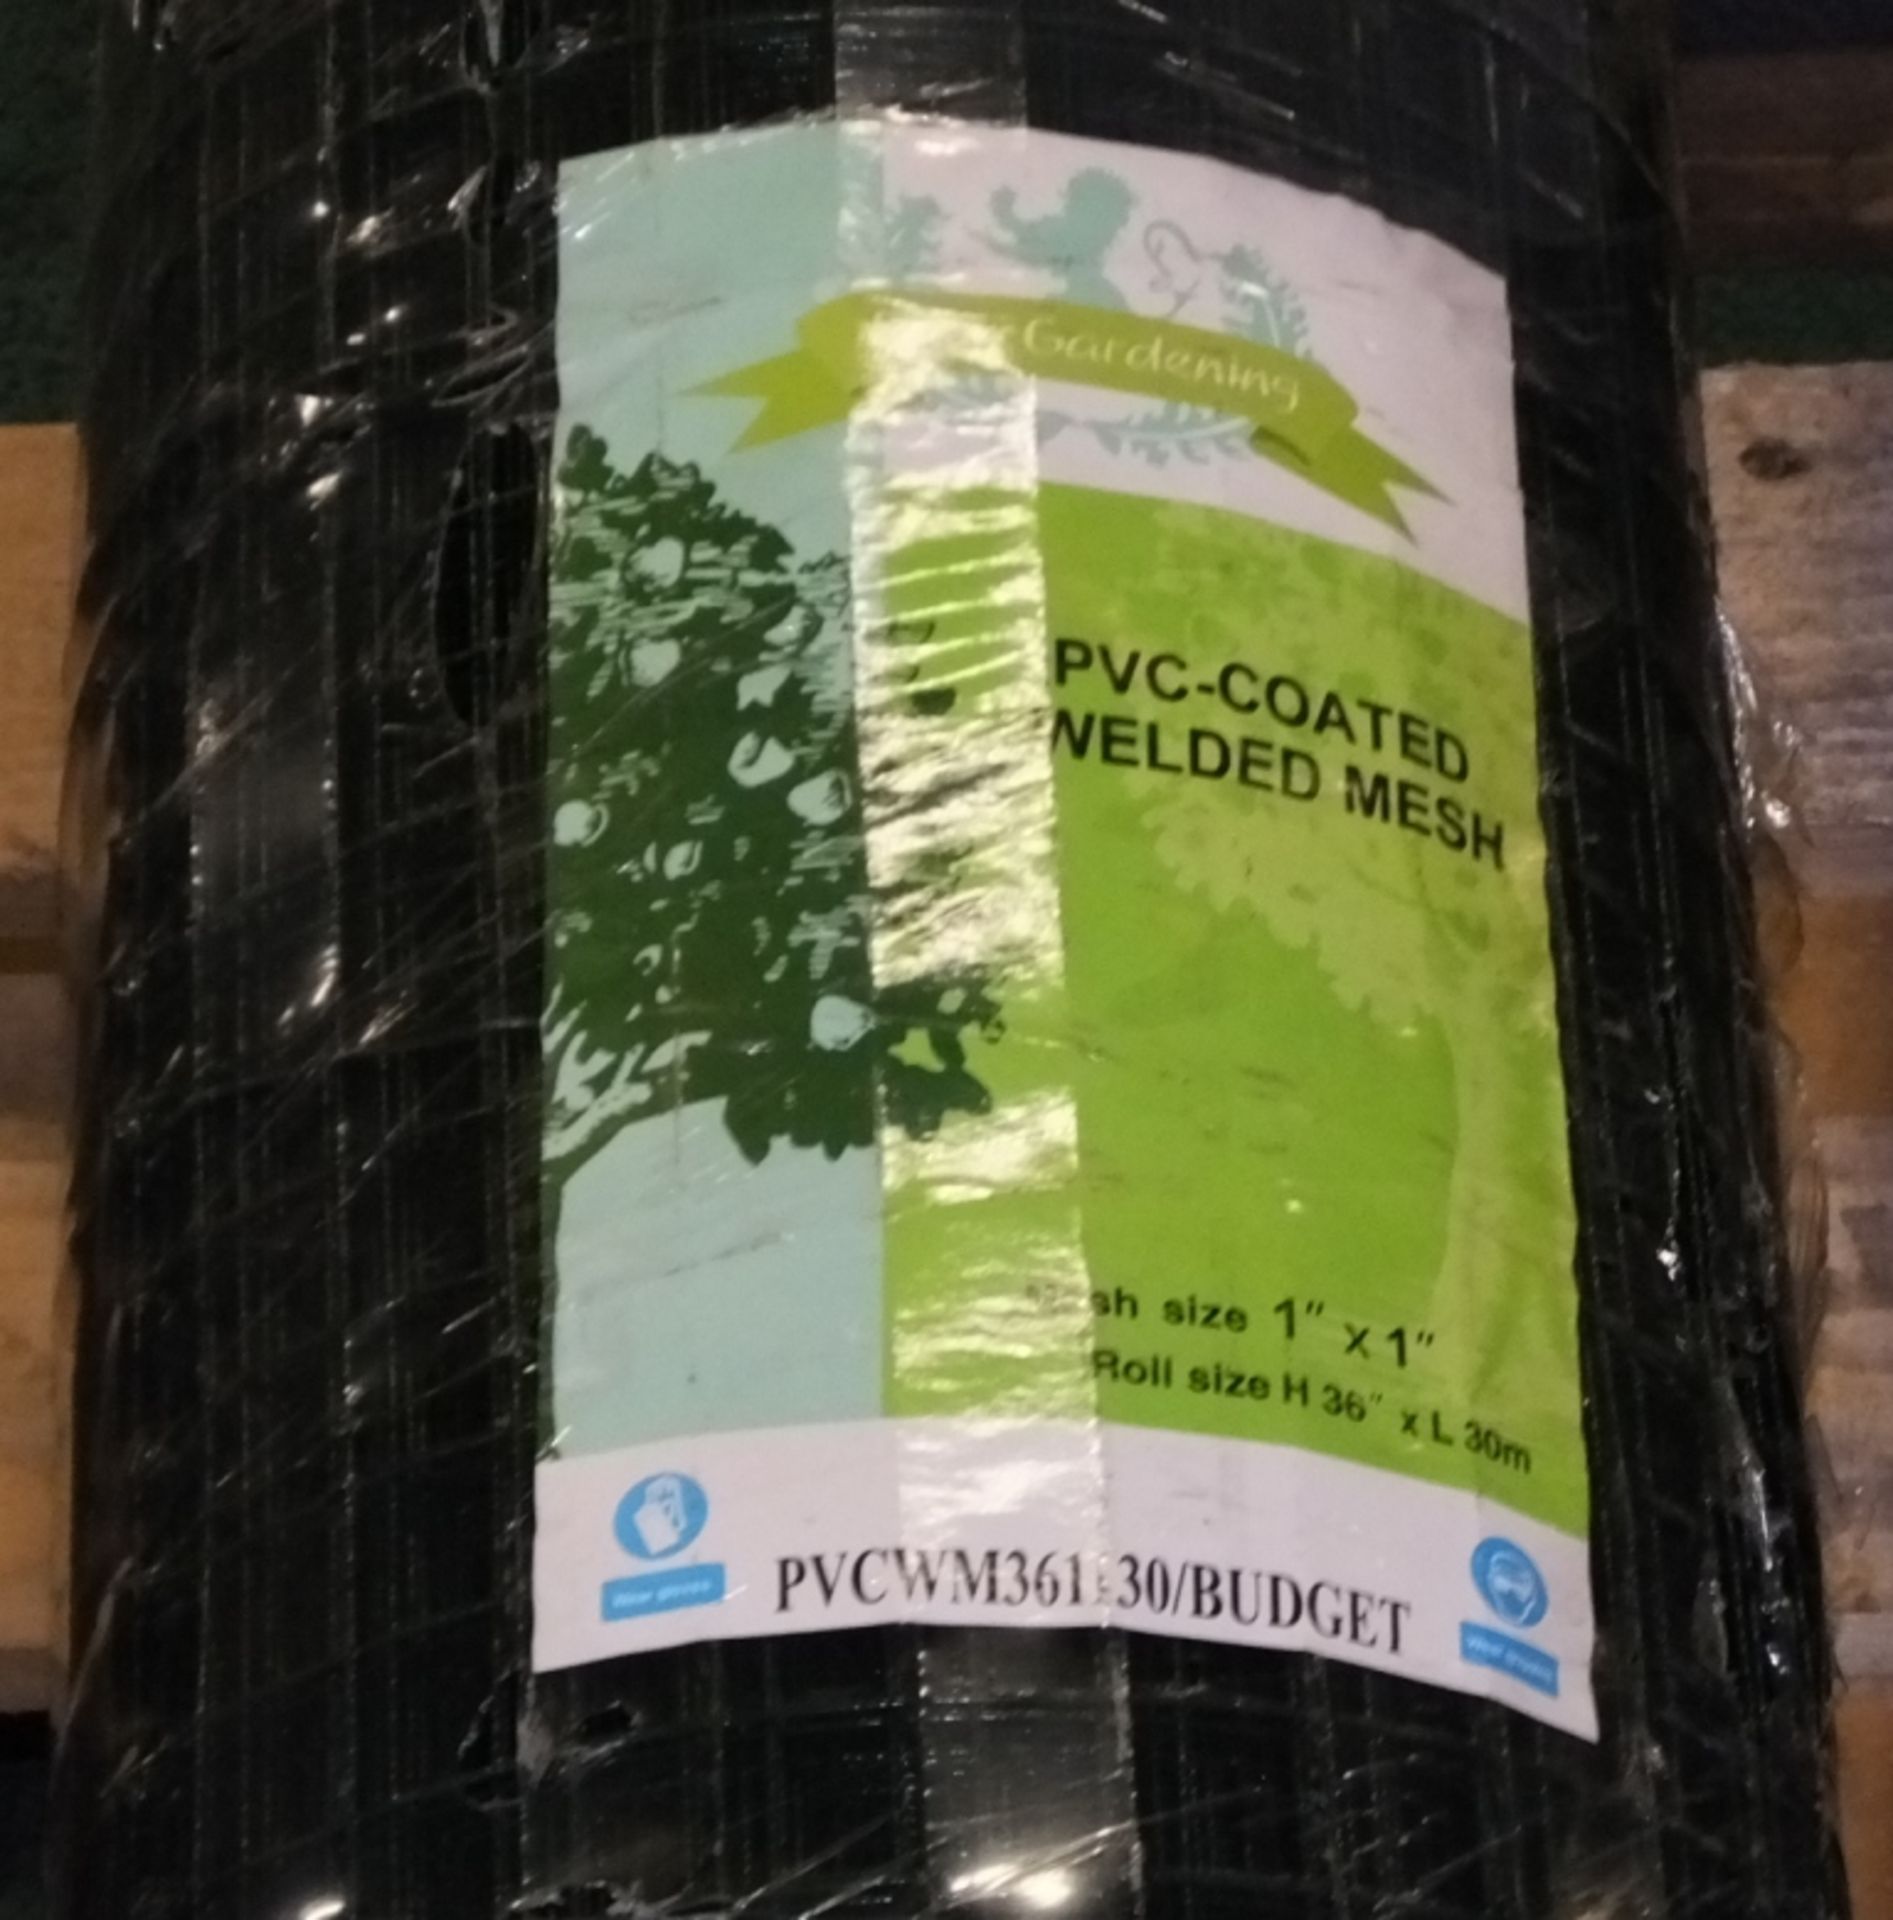 Easy Gardening PVC Coated Welded Mesh (Green) - 1" x 1" - 36" x 30M - Image 2 of 3